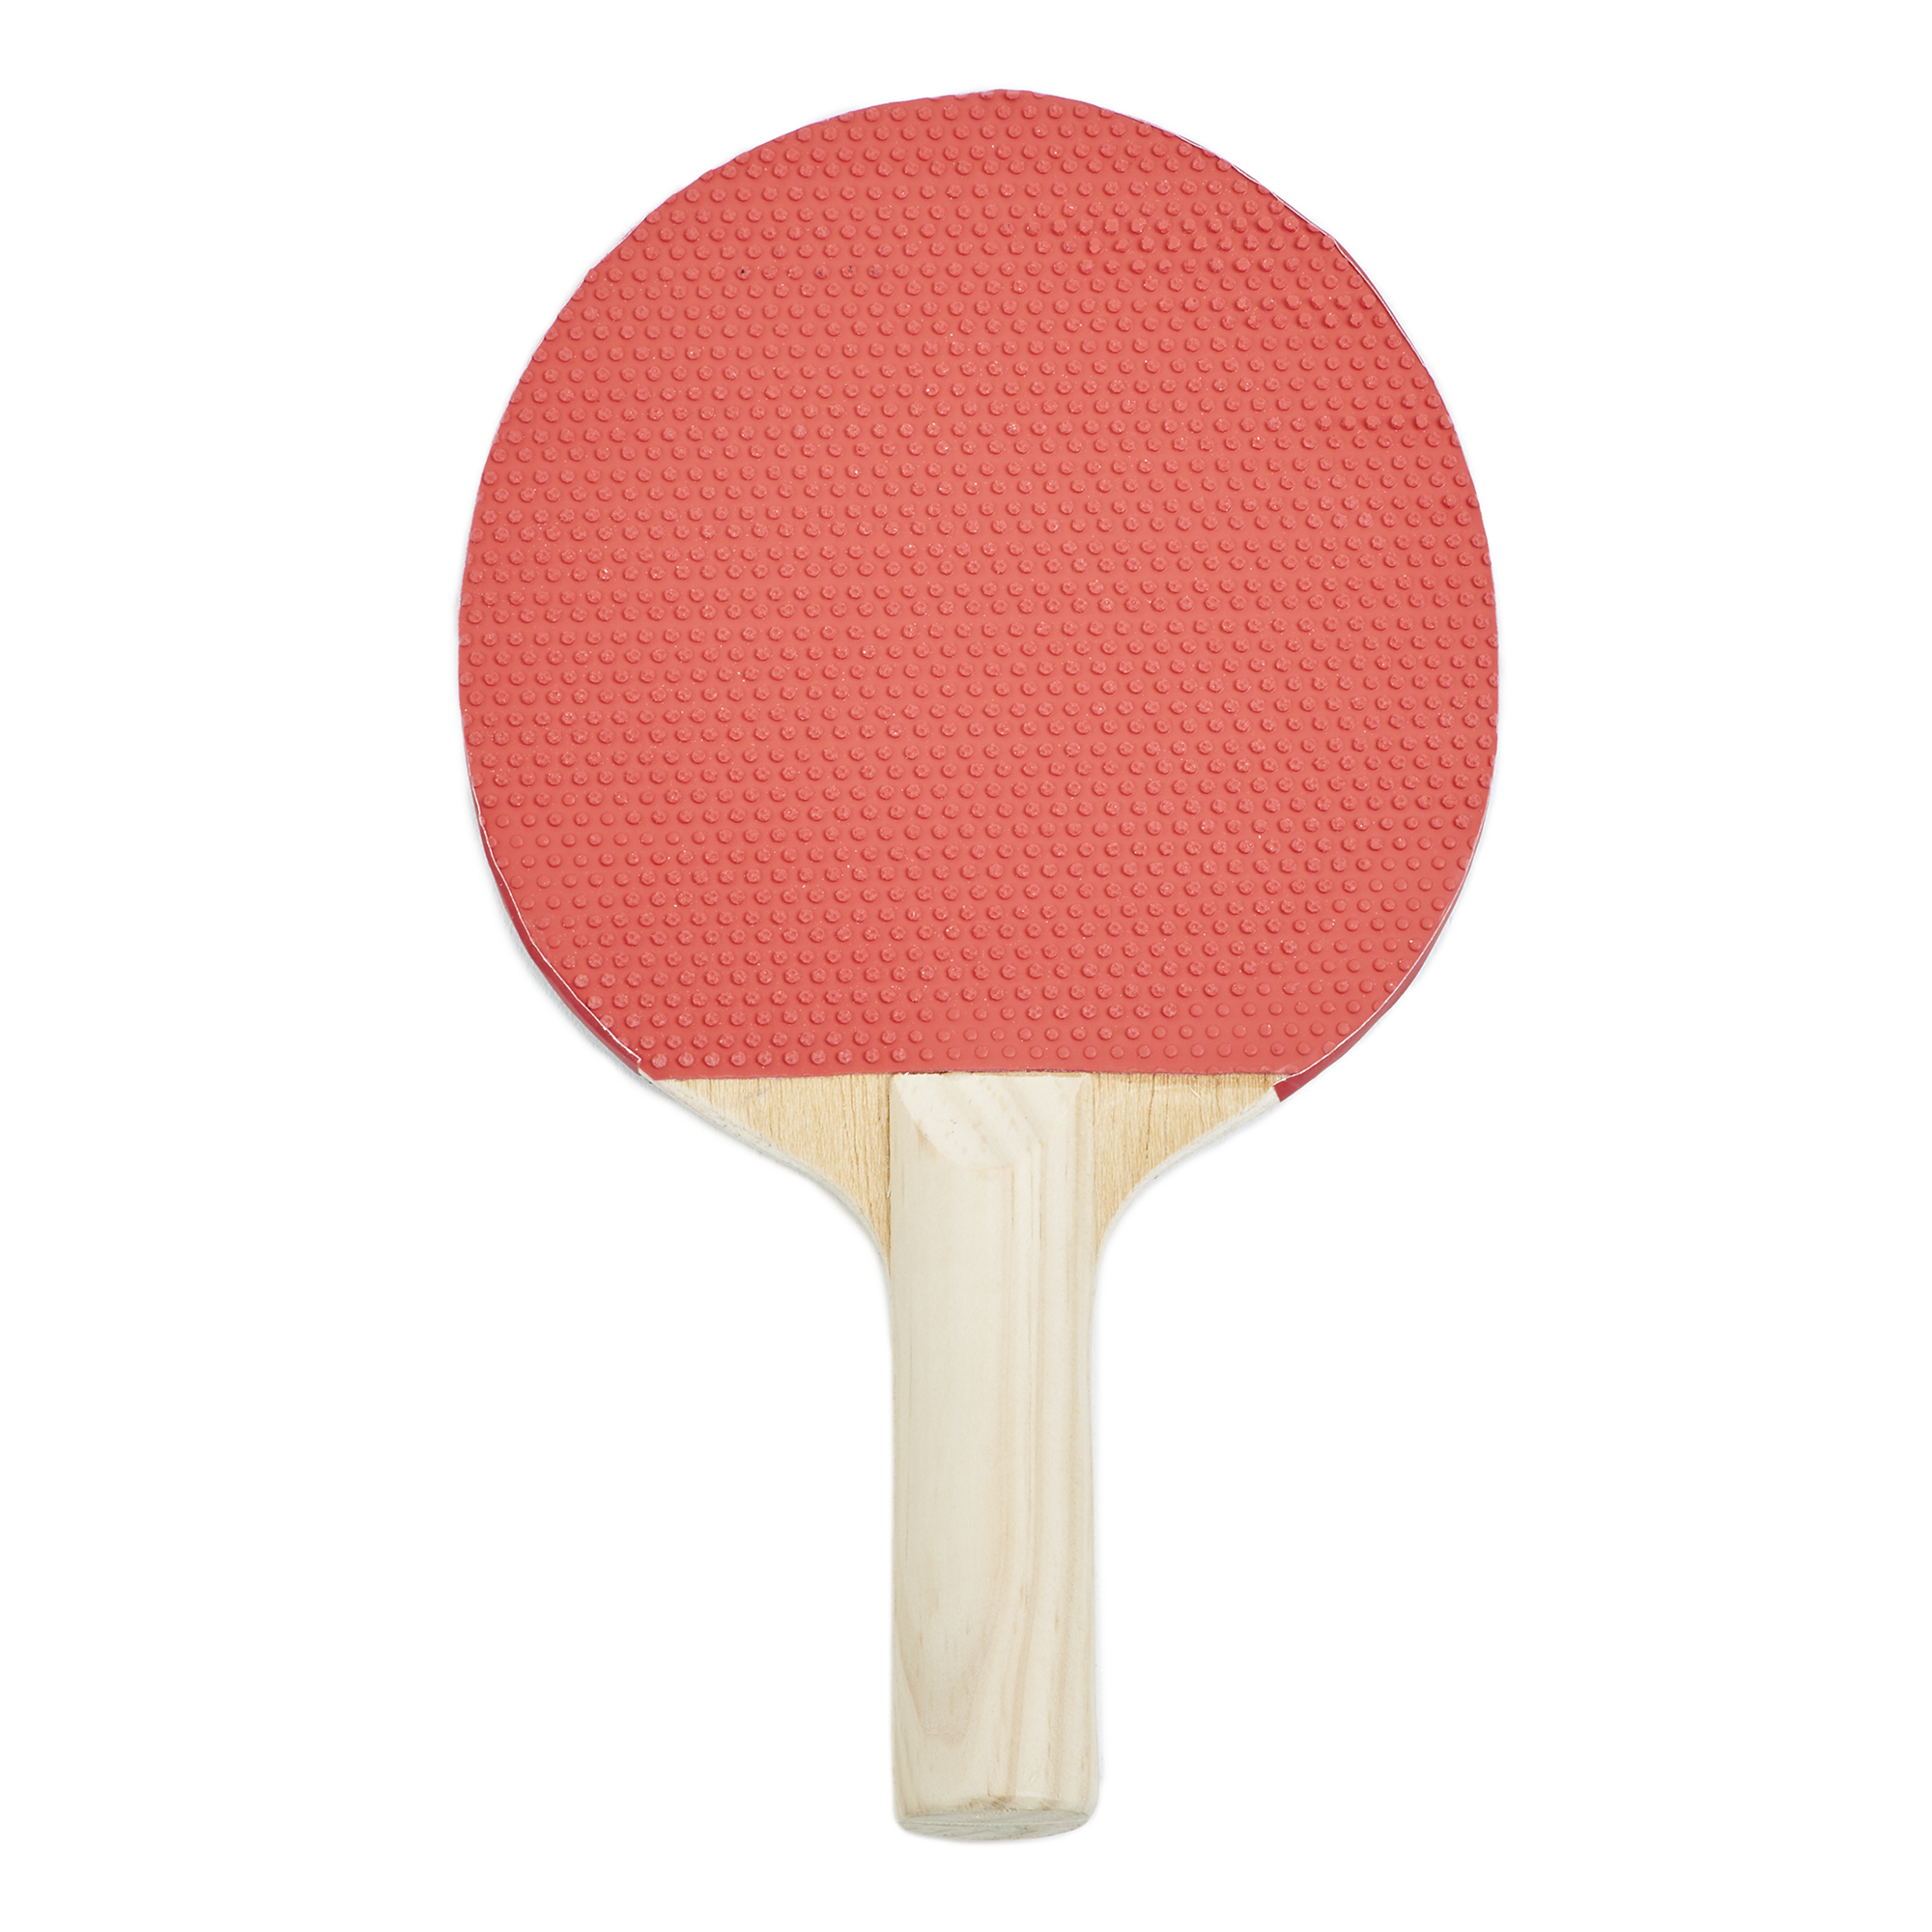 Pimpled Out Table Tennis Bat